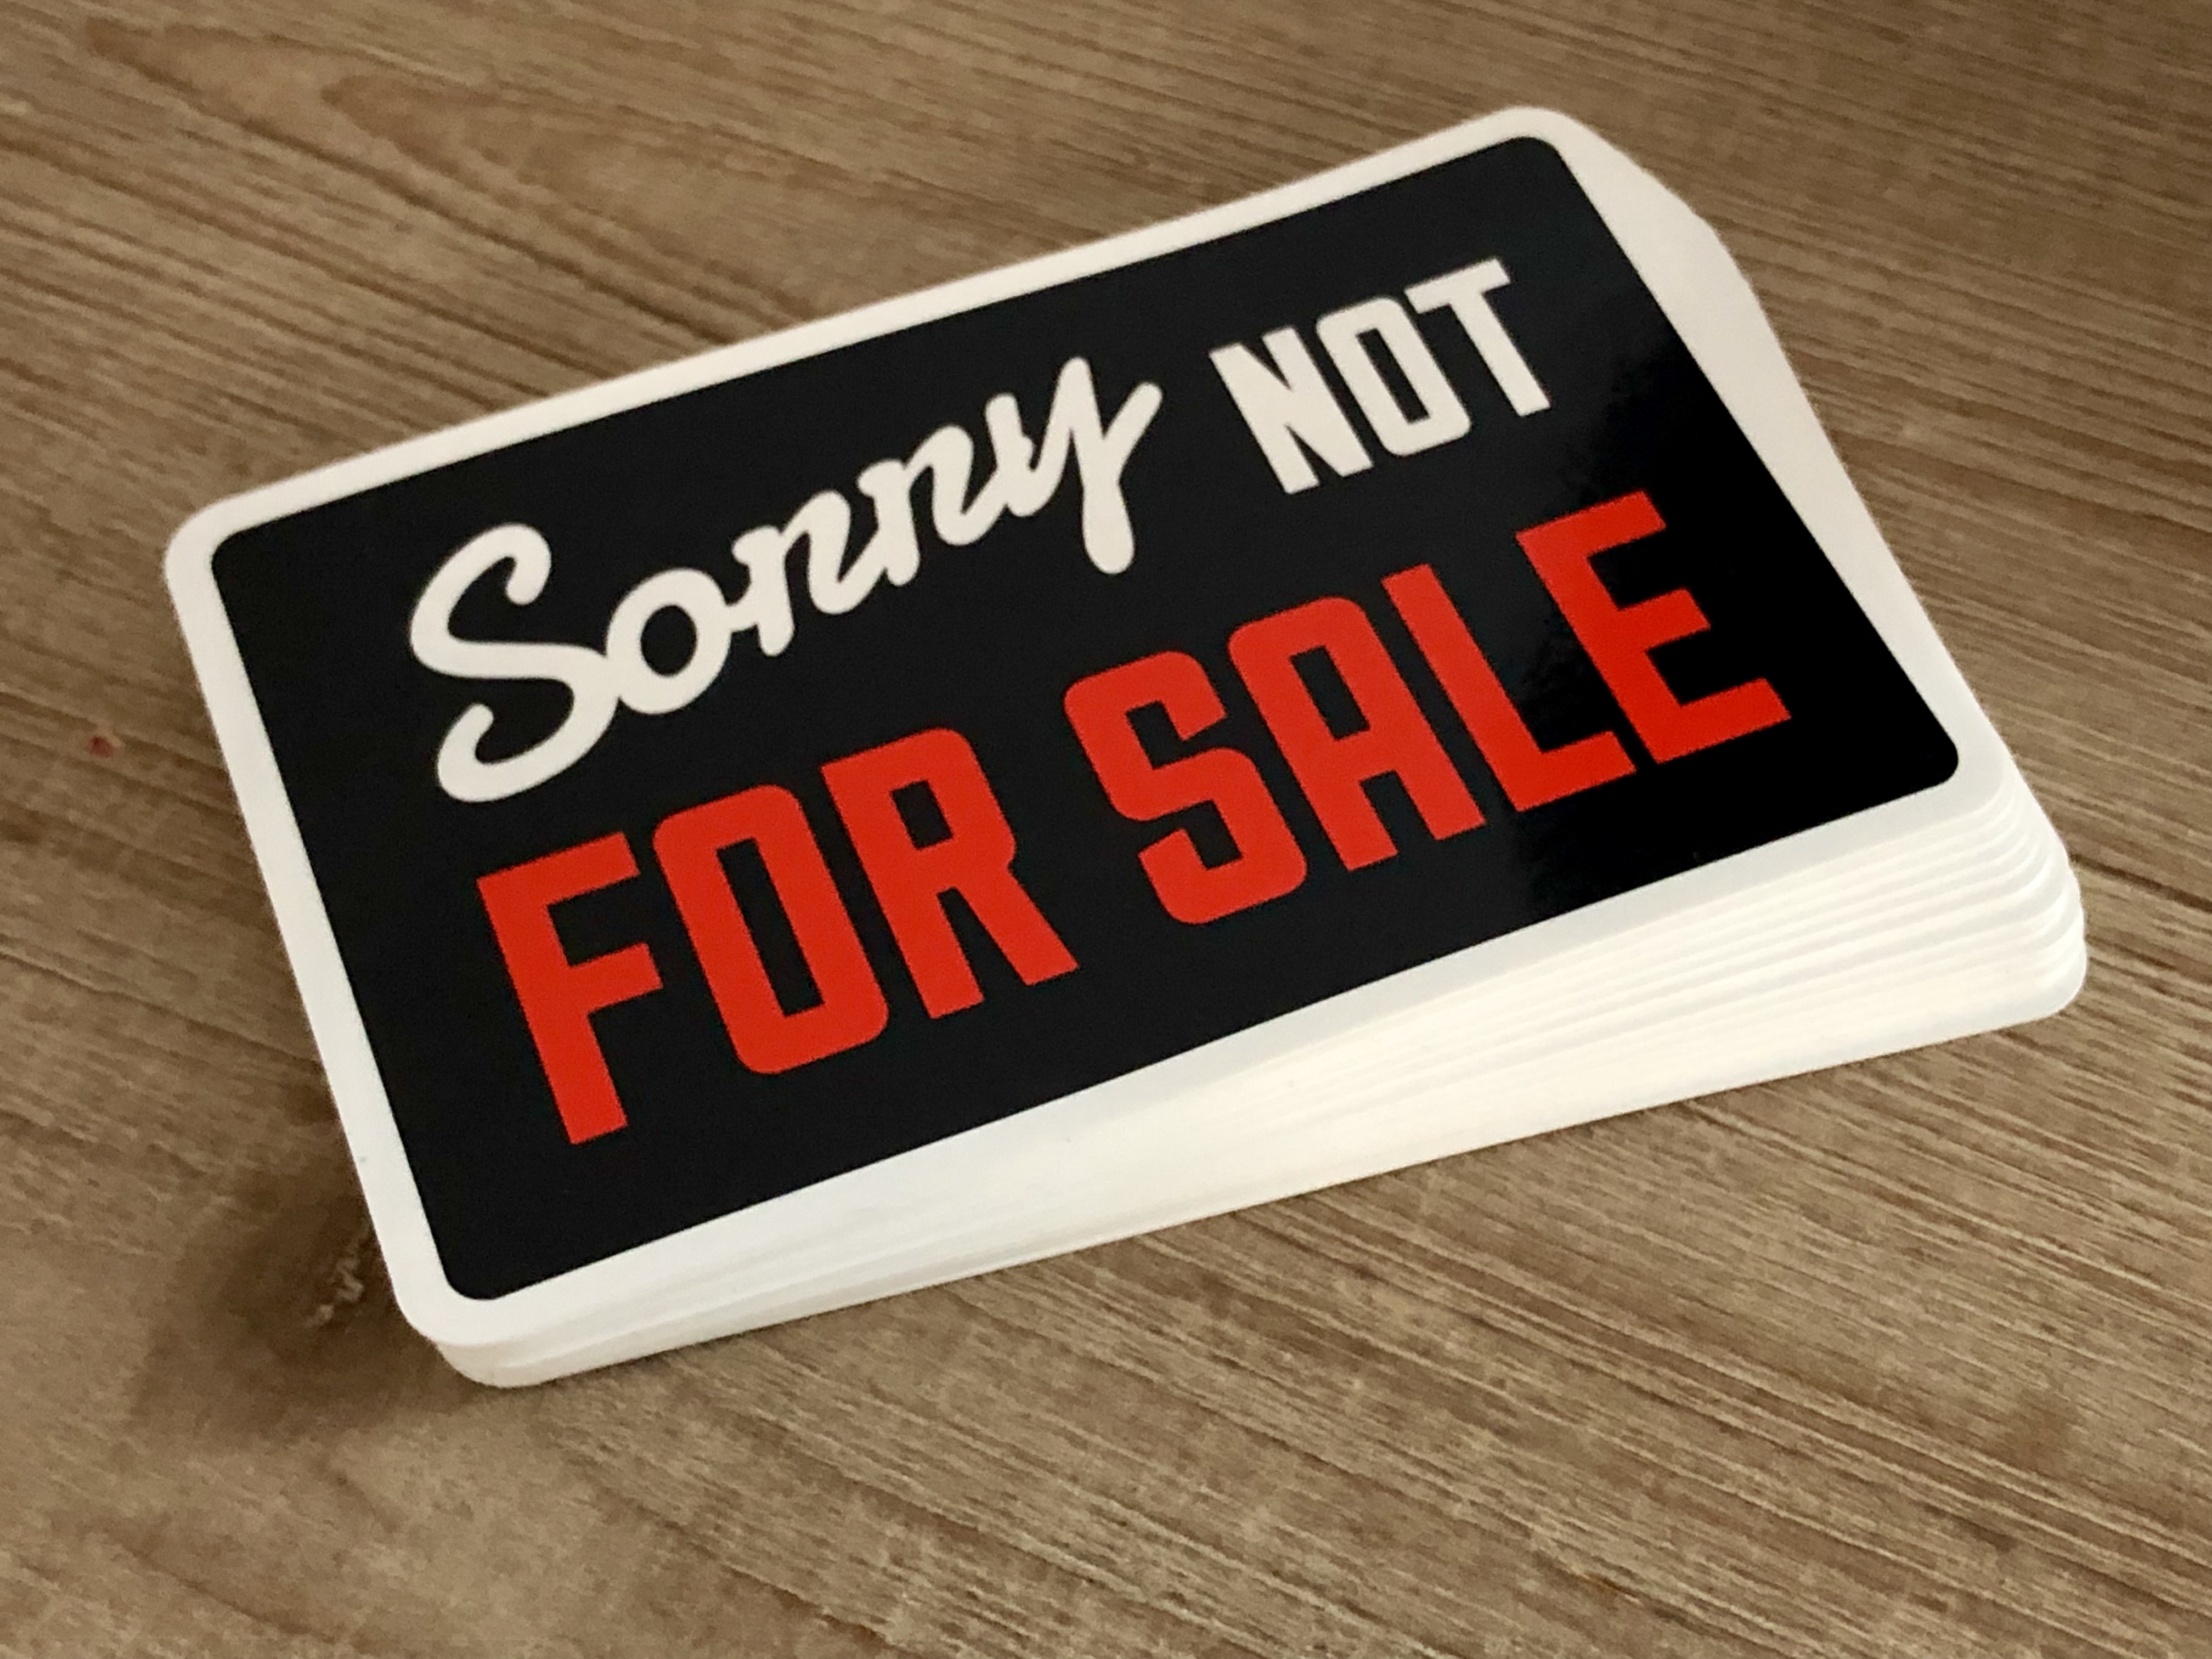 Not for sale window cling